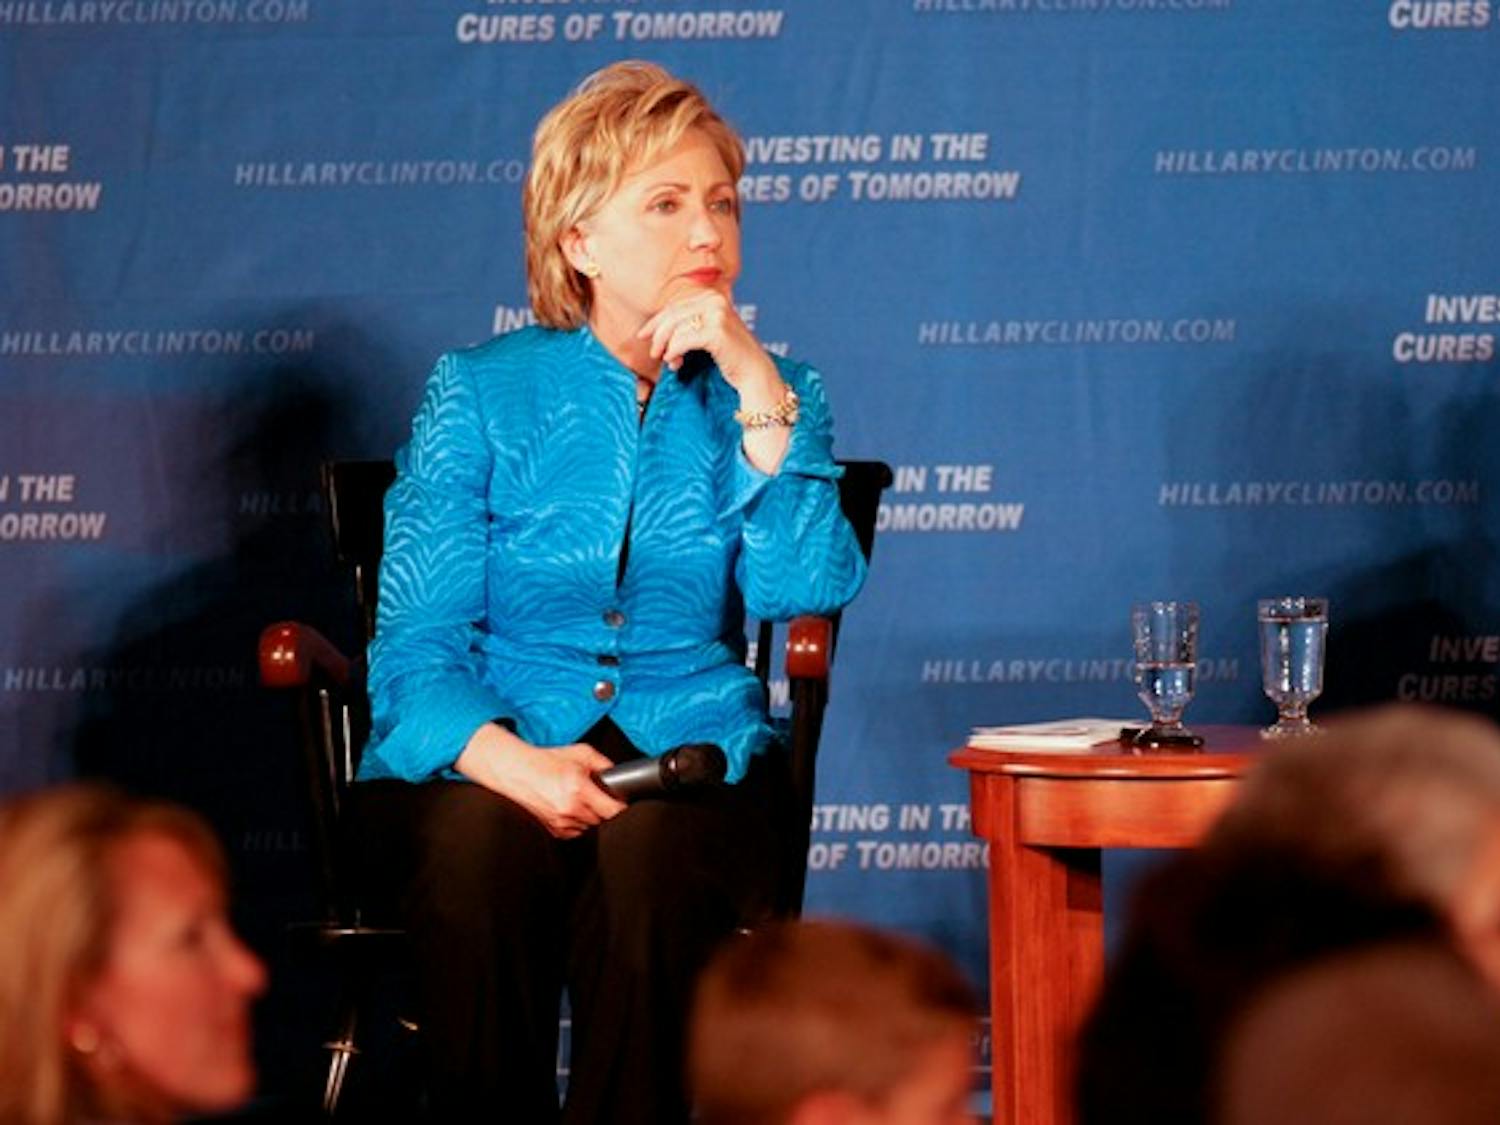 Hilary Clinton fields questions during her talk at Alumni Hall last Friday, which highlighted the importance of Congress funding stem cell research, painting the issue as one that should transcend party lines.